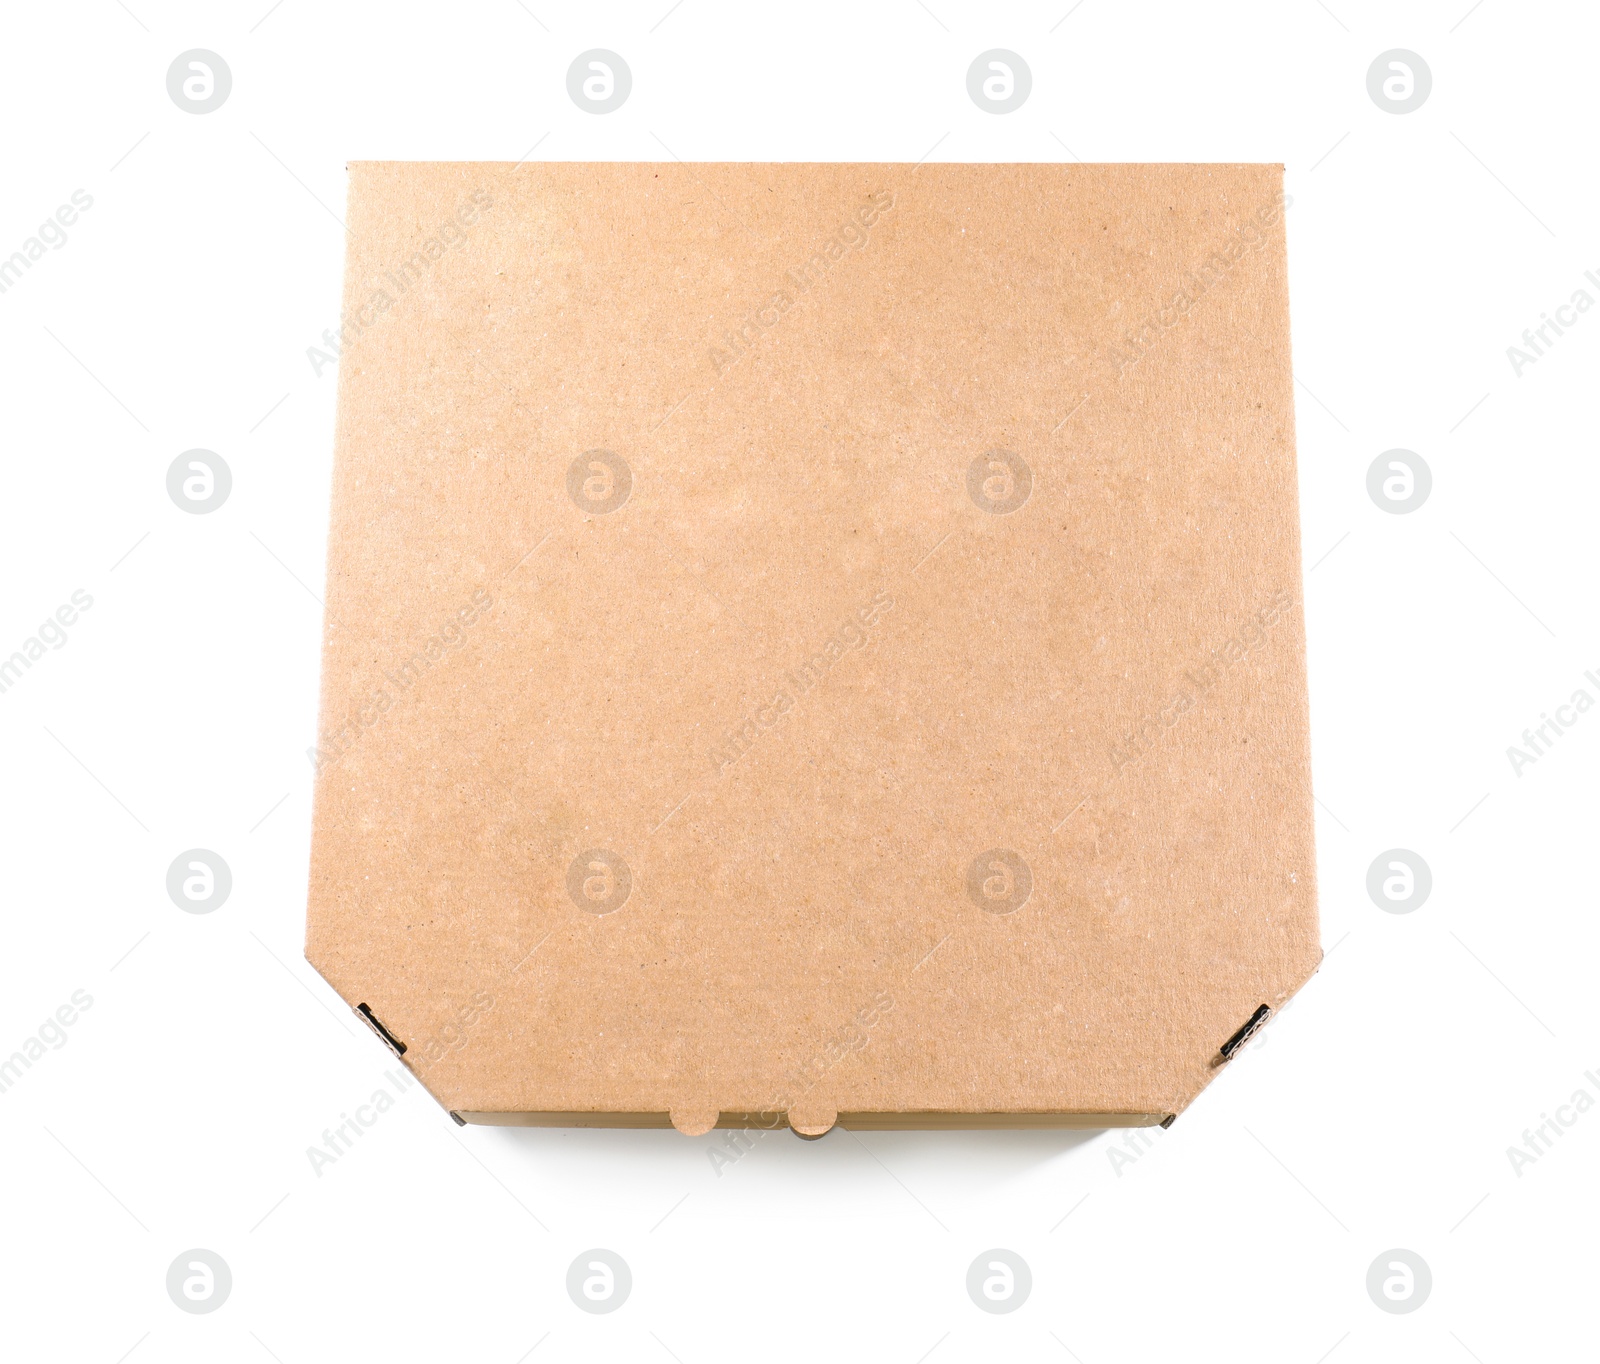 Photo of Cardboard pizza box on white background, top view. Food delivery